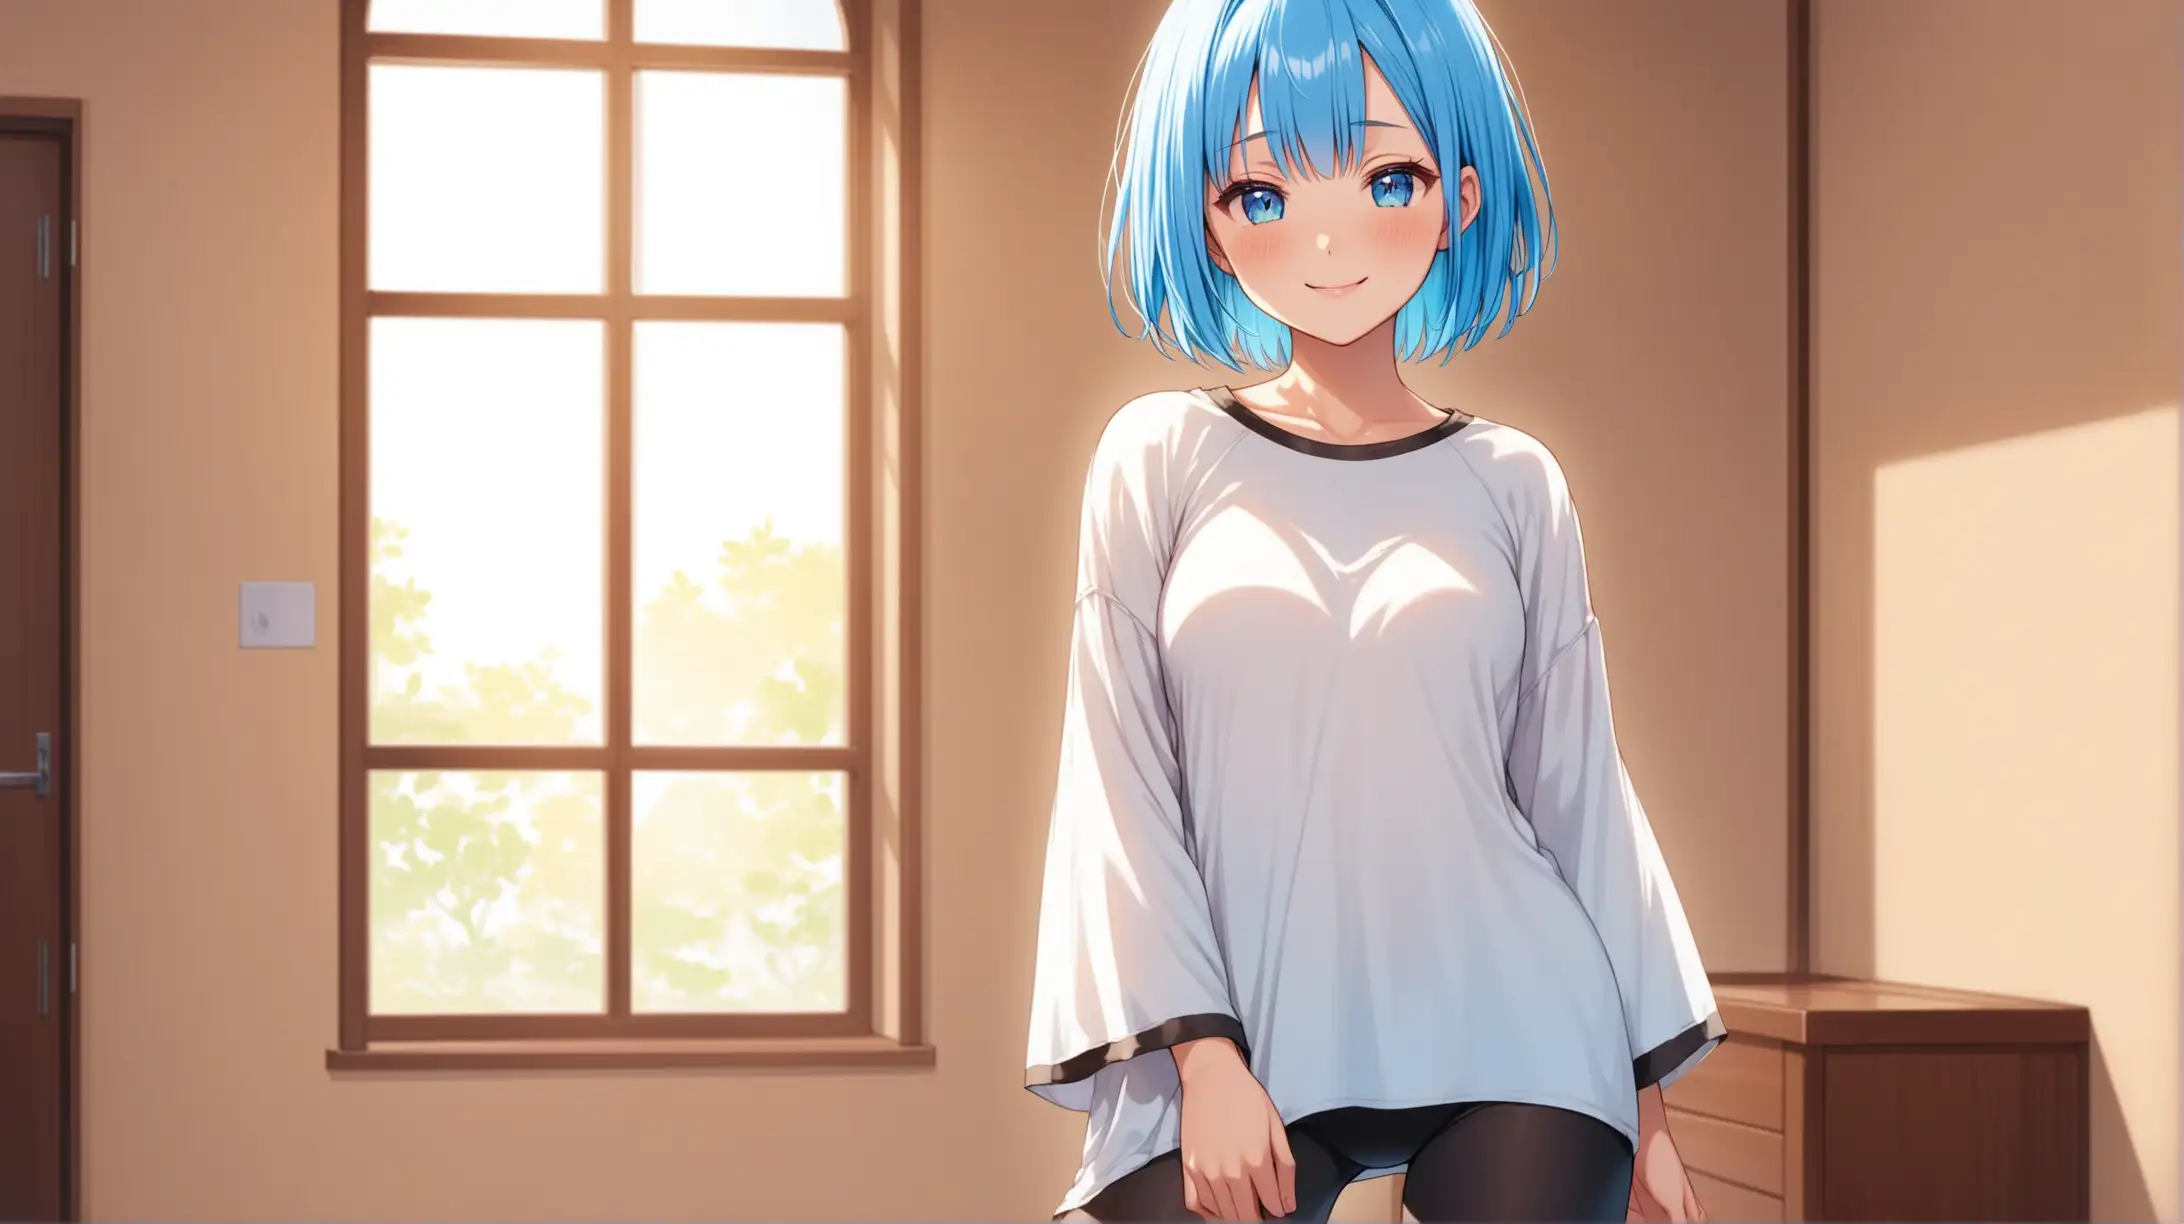 Draw the character Rem, high quality, standing alone indoors, wearing leggings and a loose fitting shirt, she is smiling lovingly at the viewer